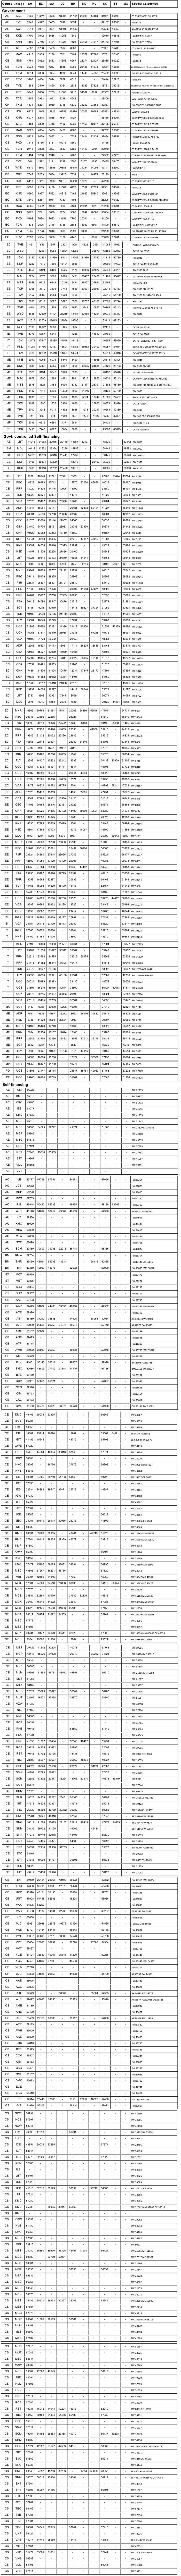 KEAM 2013 Second Phase Allotments Last Ranks (Cut Offs)